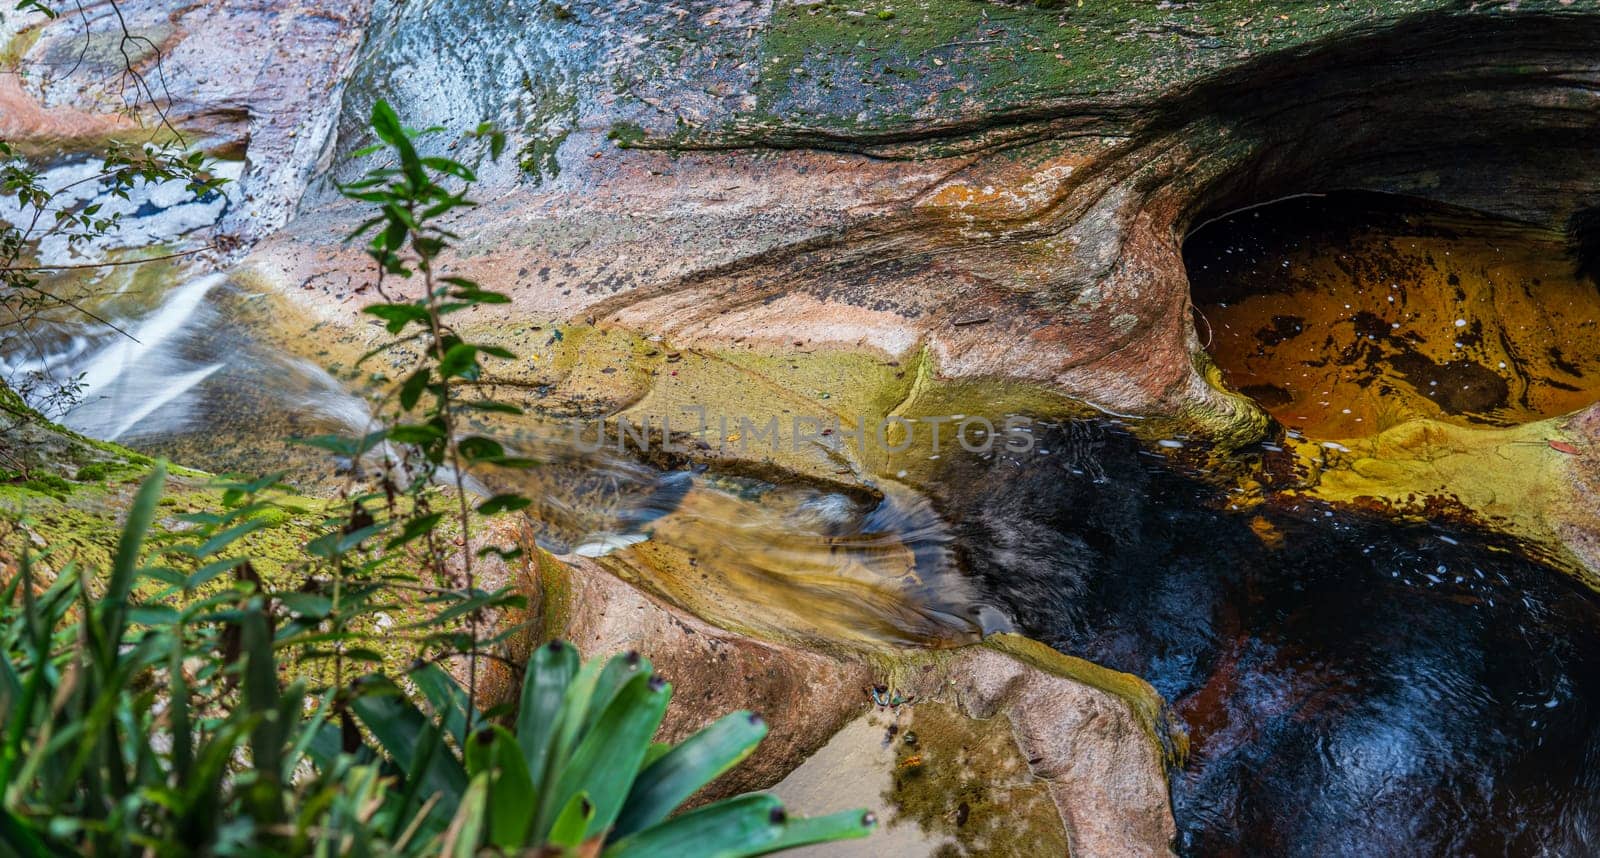 Colorful Rock Formations with Flowing Water in Nature by FerradalFCG